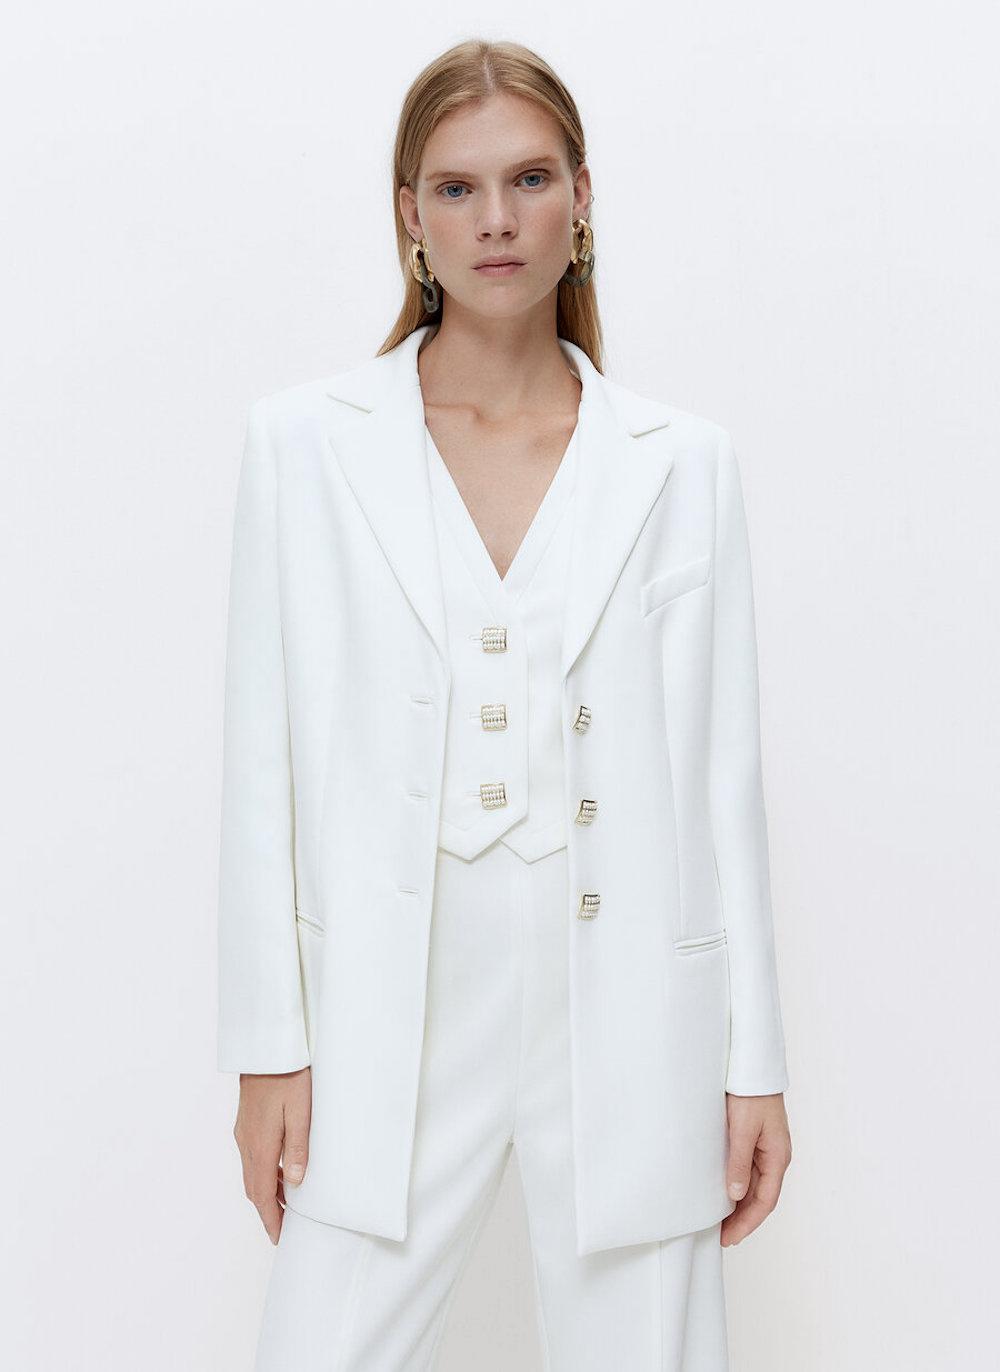 35 of the Best Bridal Jackets for 2022 - hitched.co.uk